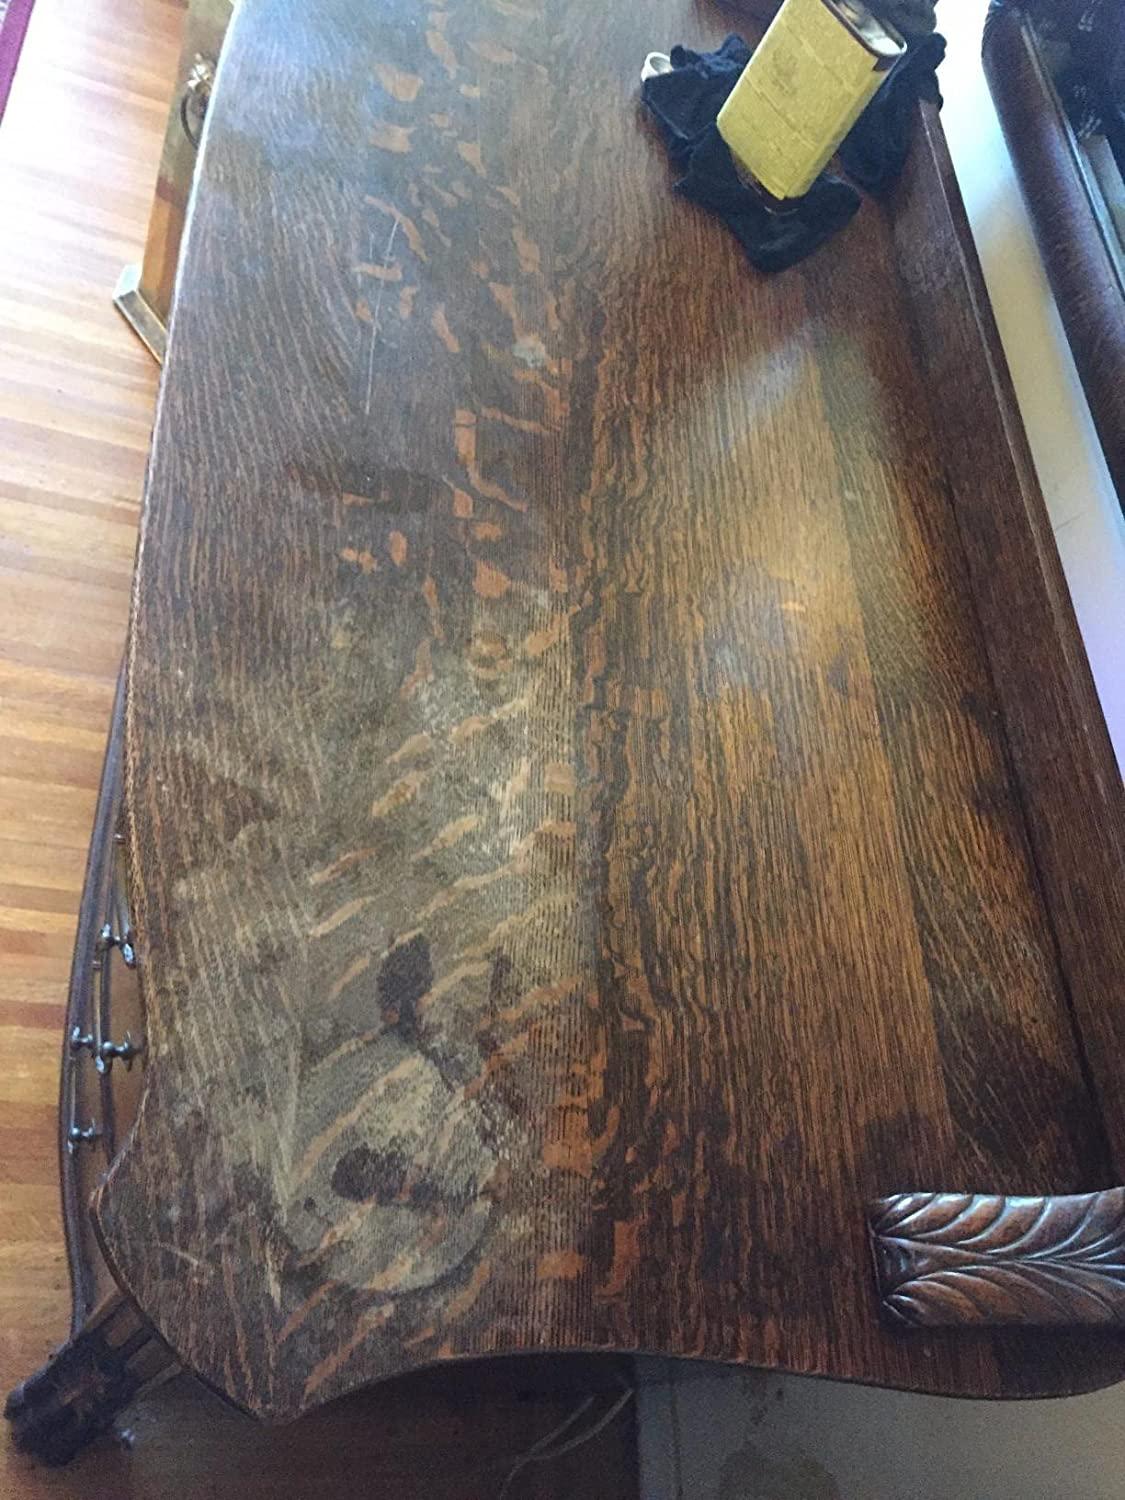 Restor-A-Finish maintains the original “patina” of an antique finish,  maintaining its character and value as an antique. Feed-N-Wax is the  perfect, By Howard Products, Inc.